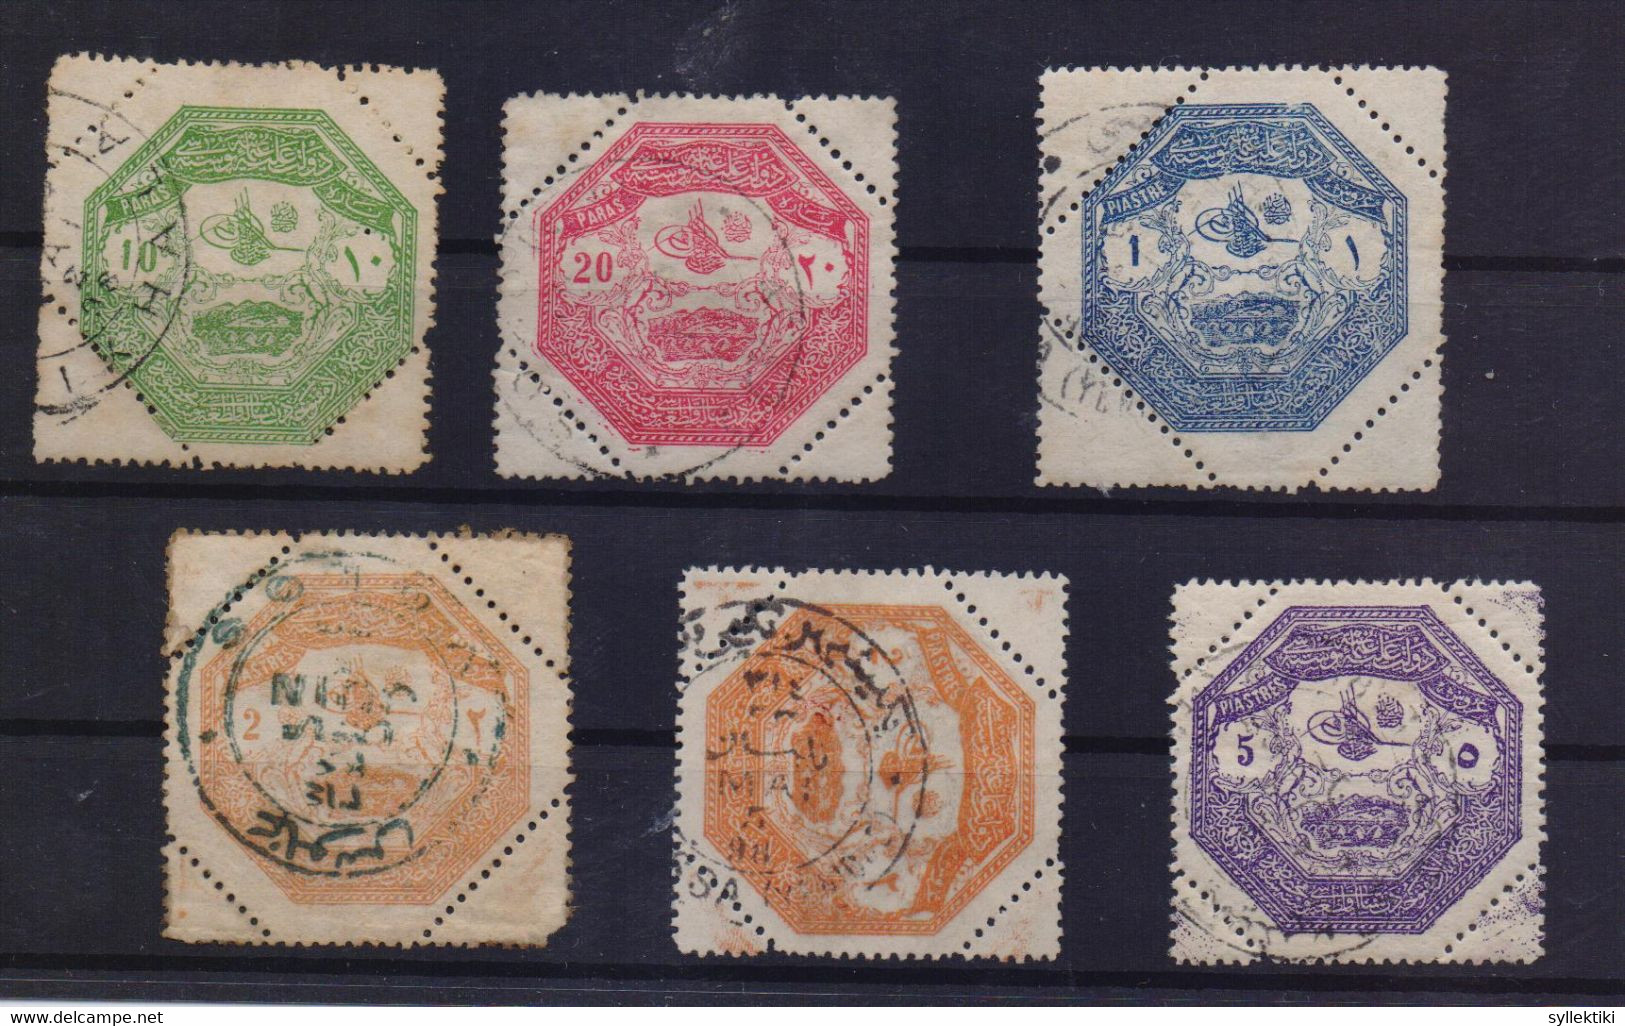 GREECE 1898 THESALLY COMPLETE SET USED STAMPS - Thessalie